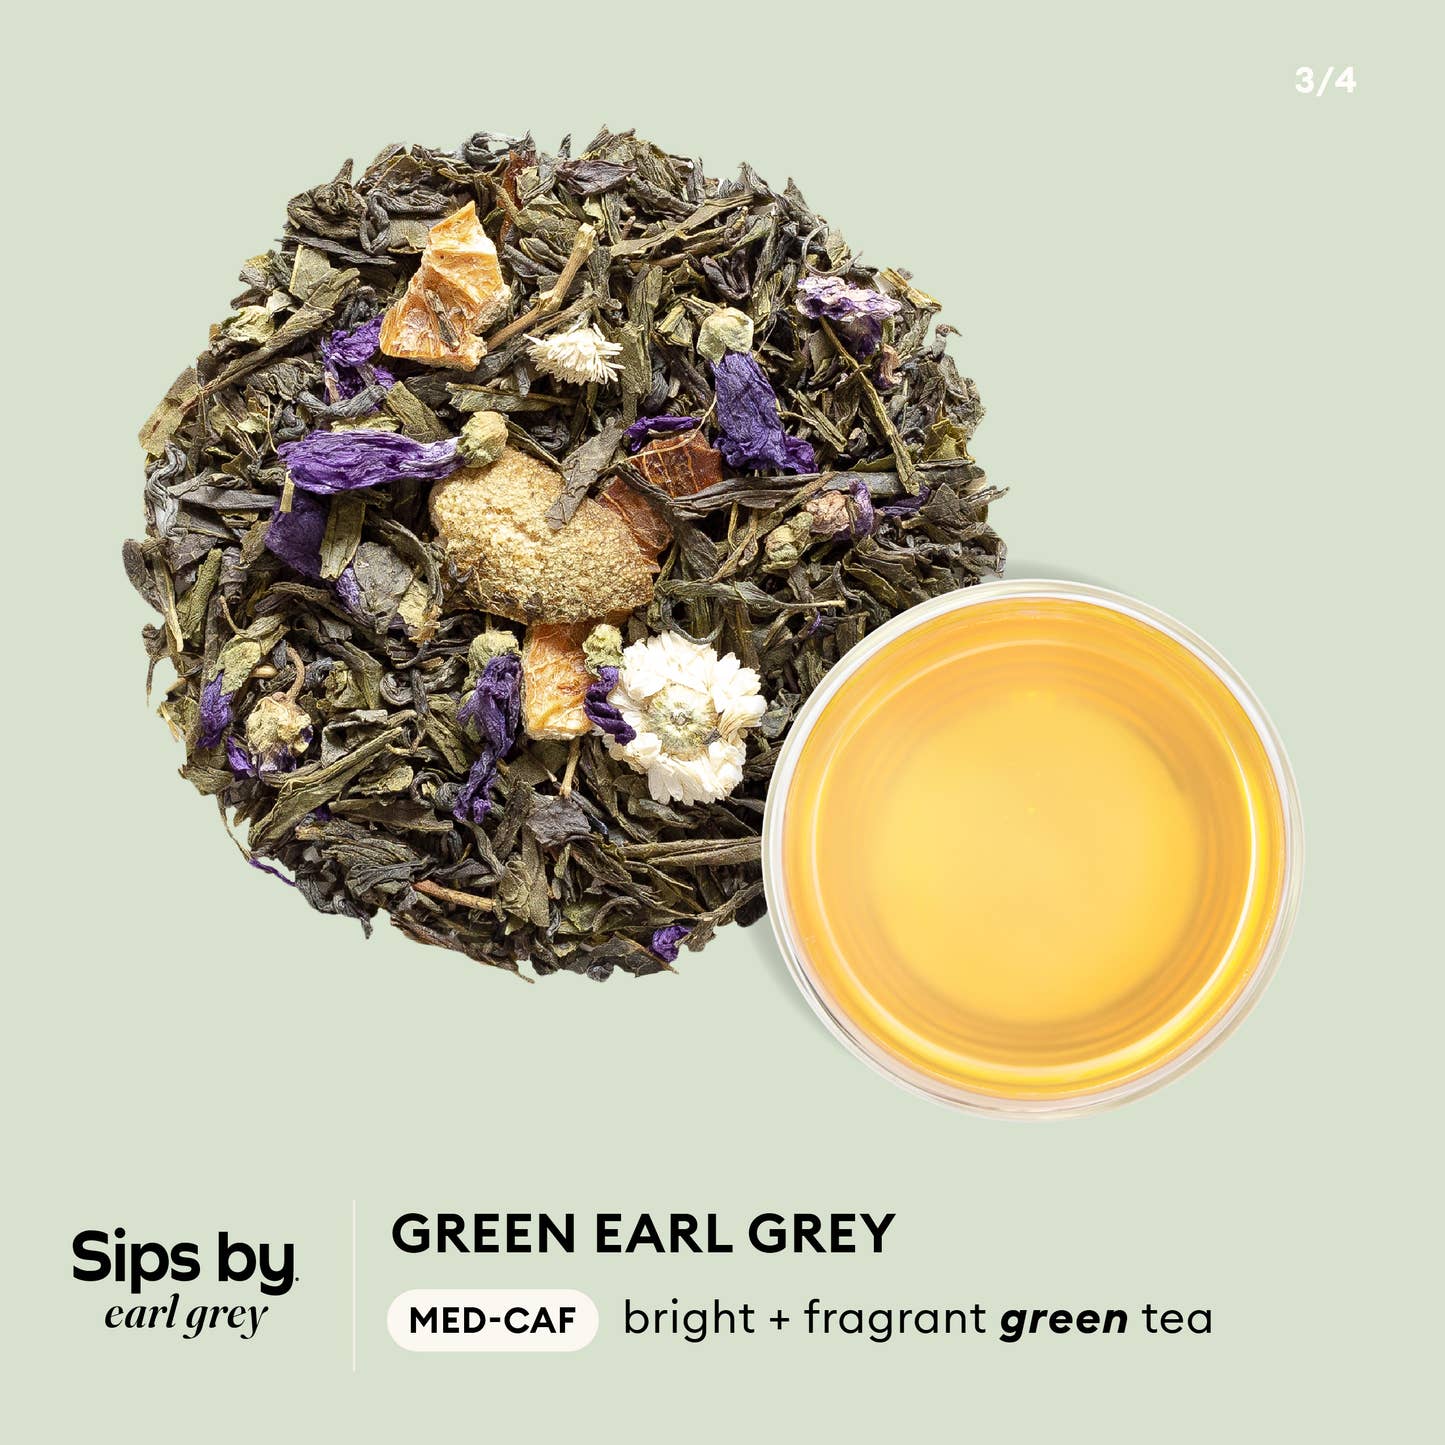 Sips by Earl Grey - Green Earl Grey med-caf, bright + fragrant infographic